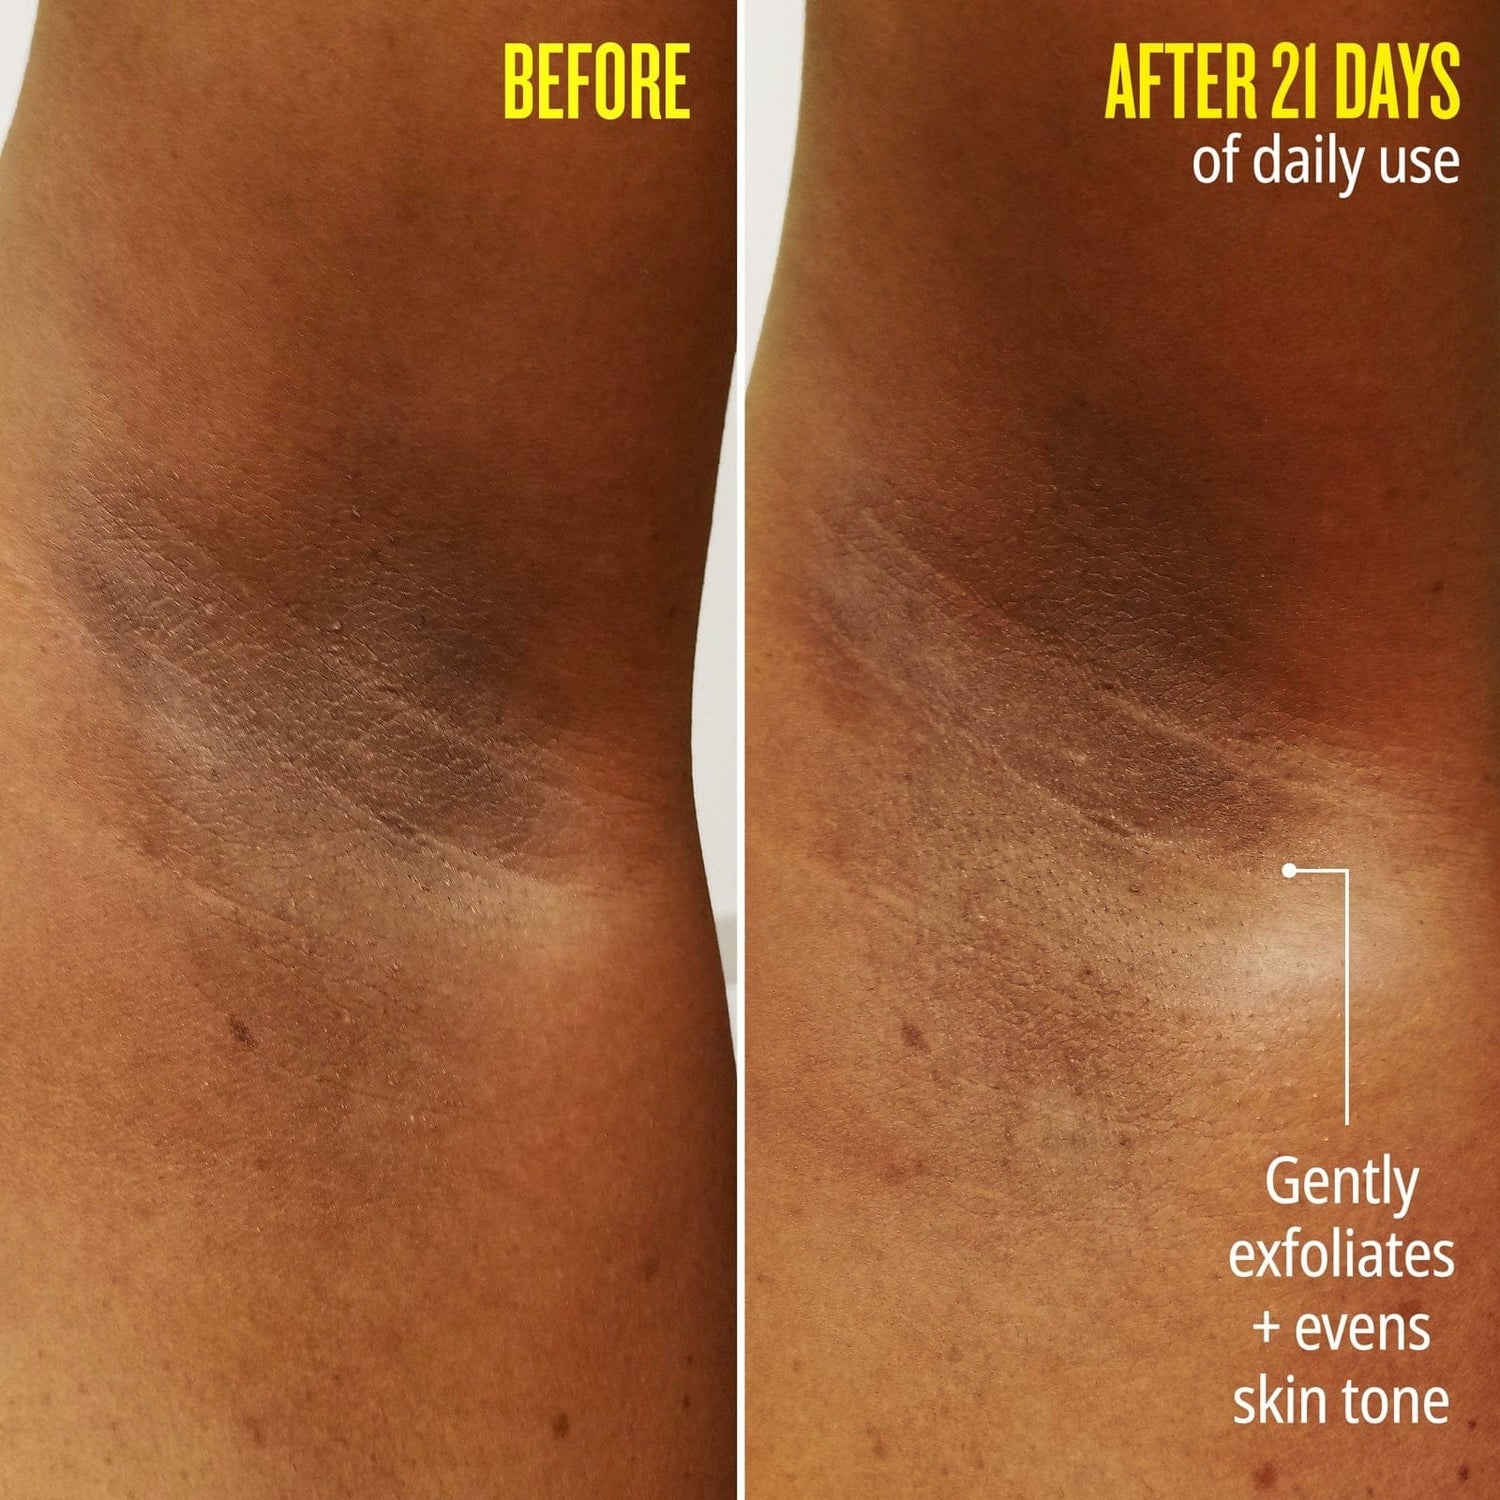 Before // After 21 days of daily use - gently exfoliates + evens skin tone